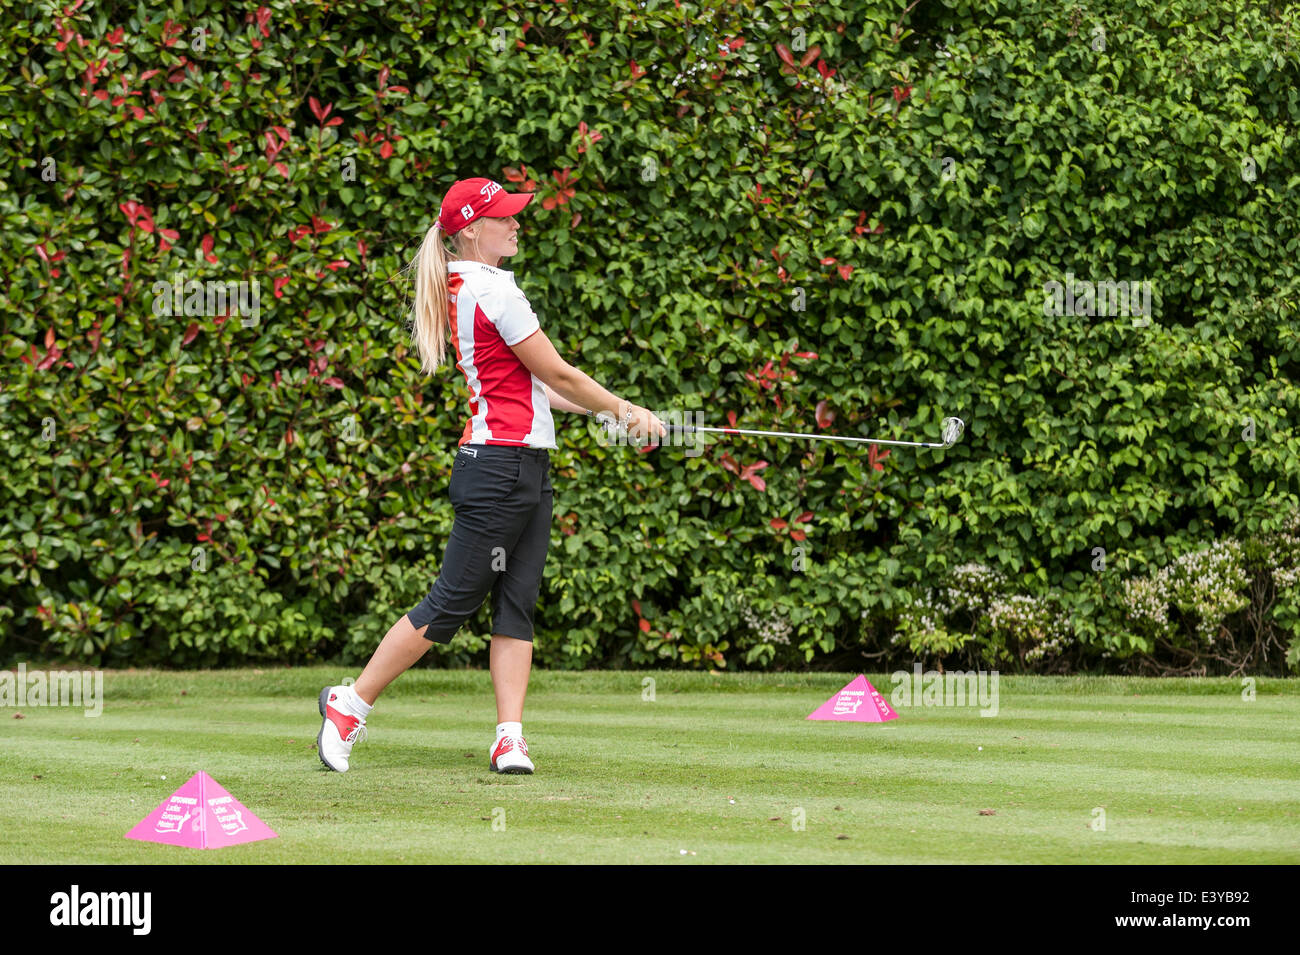 Denham, London, UK, 1 July 2014.  ISPS HANDA Ladies European Masters 2014 - practice day at The Buckinghamshire golf club.  A field of 144 competitors representing 33 nationalities with more than 300 international titles will tee up in the Ladies European Tour's home tournament.  Pictured : Louise Larsson (Sweden). Credit:  Stephen Chung/Alamy Live News Stock Photo